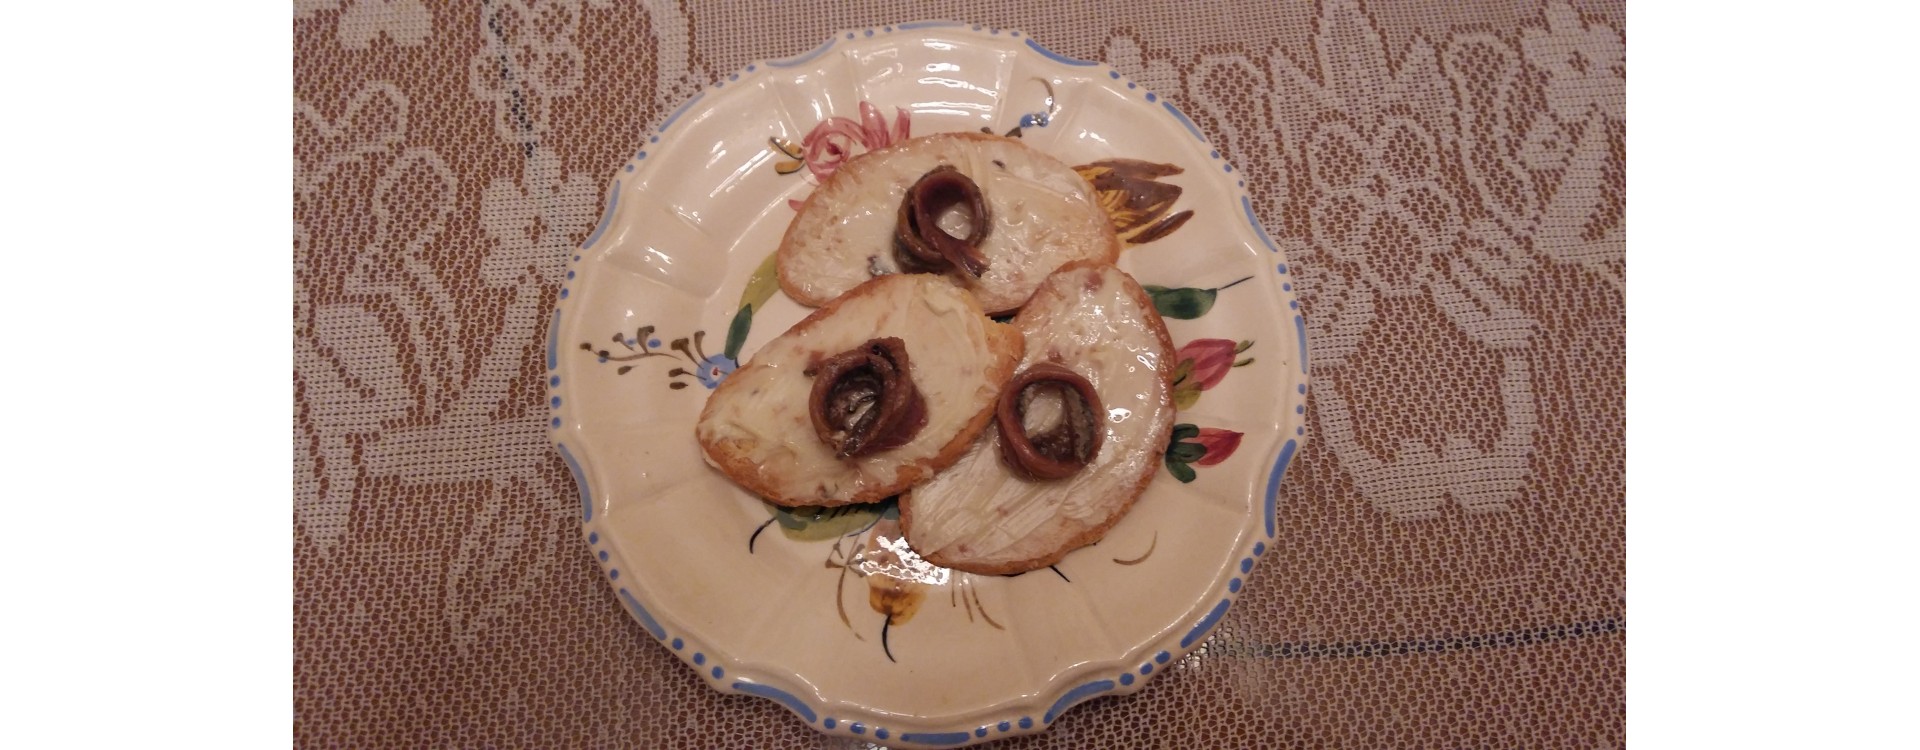 Slices of toasted bread with butter and anchovies in oil